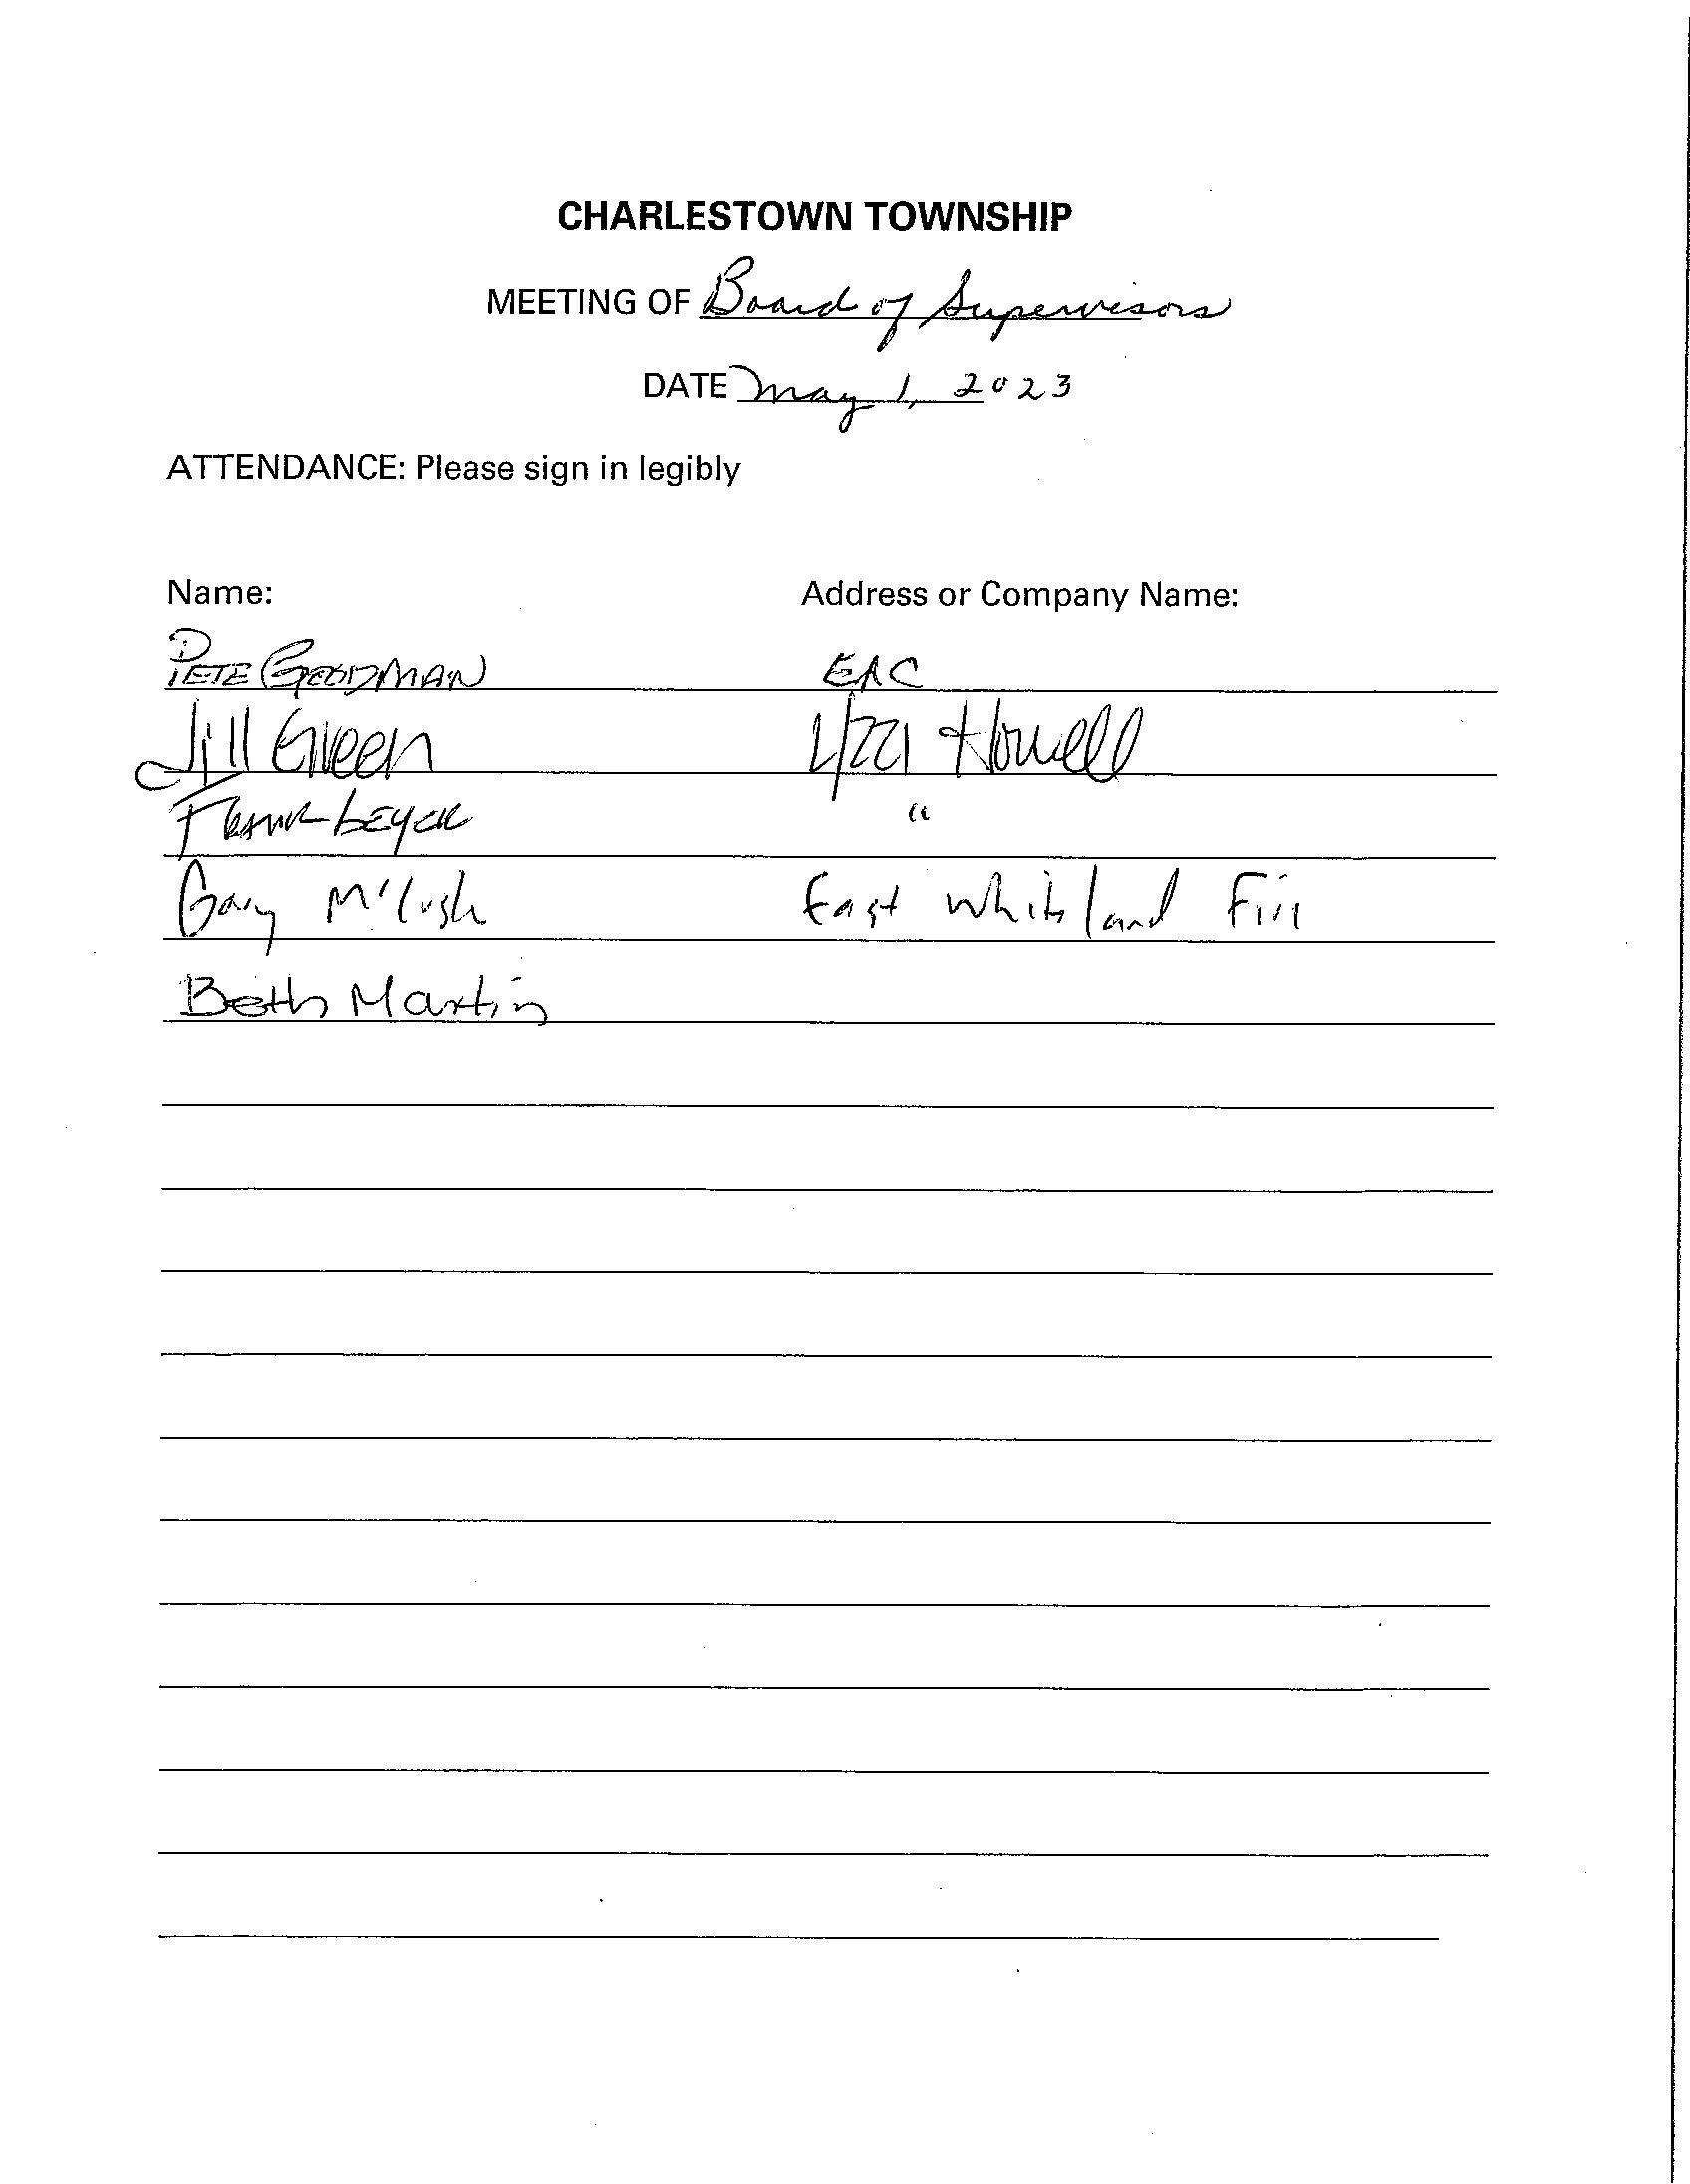 Sign-in sheet, 5/1/2023